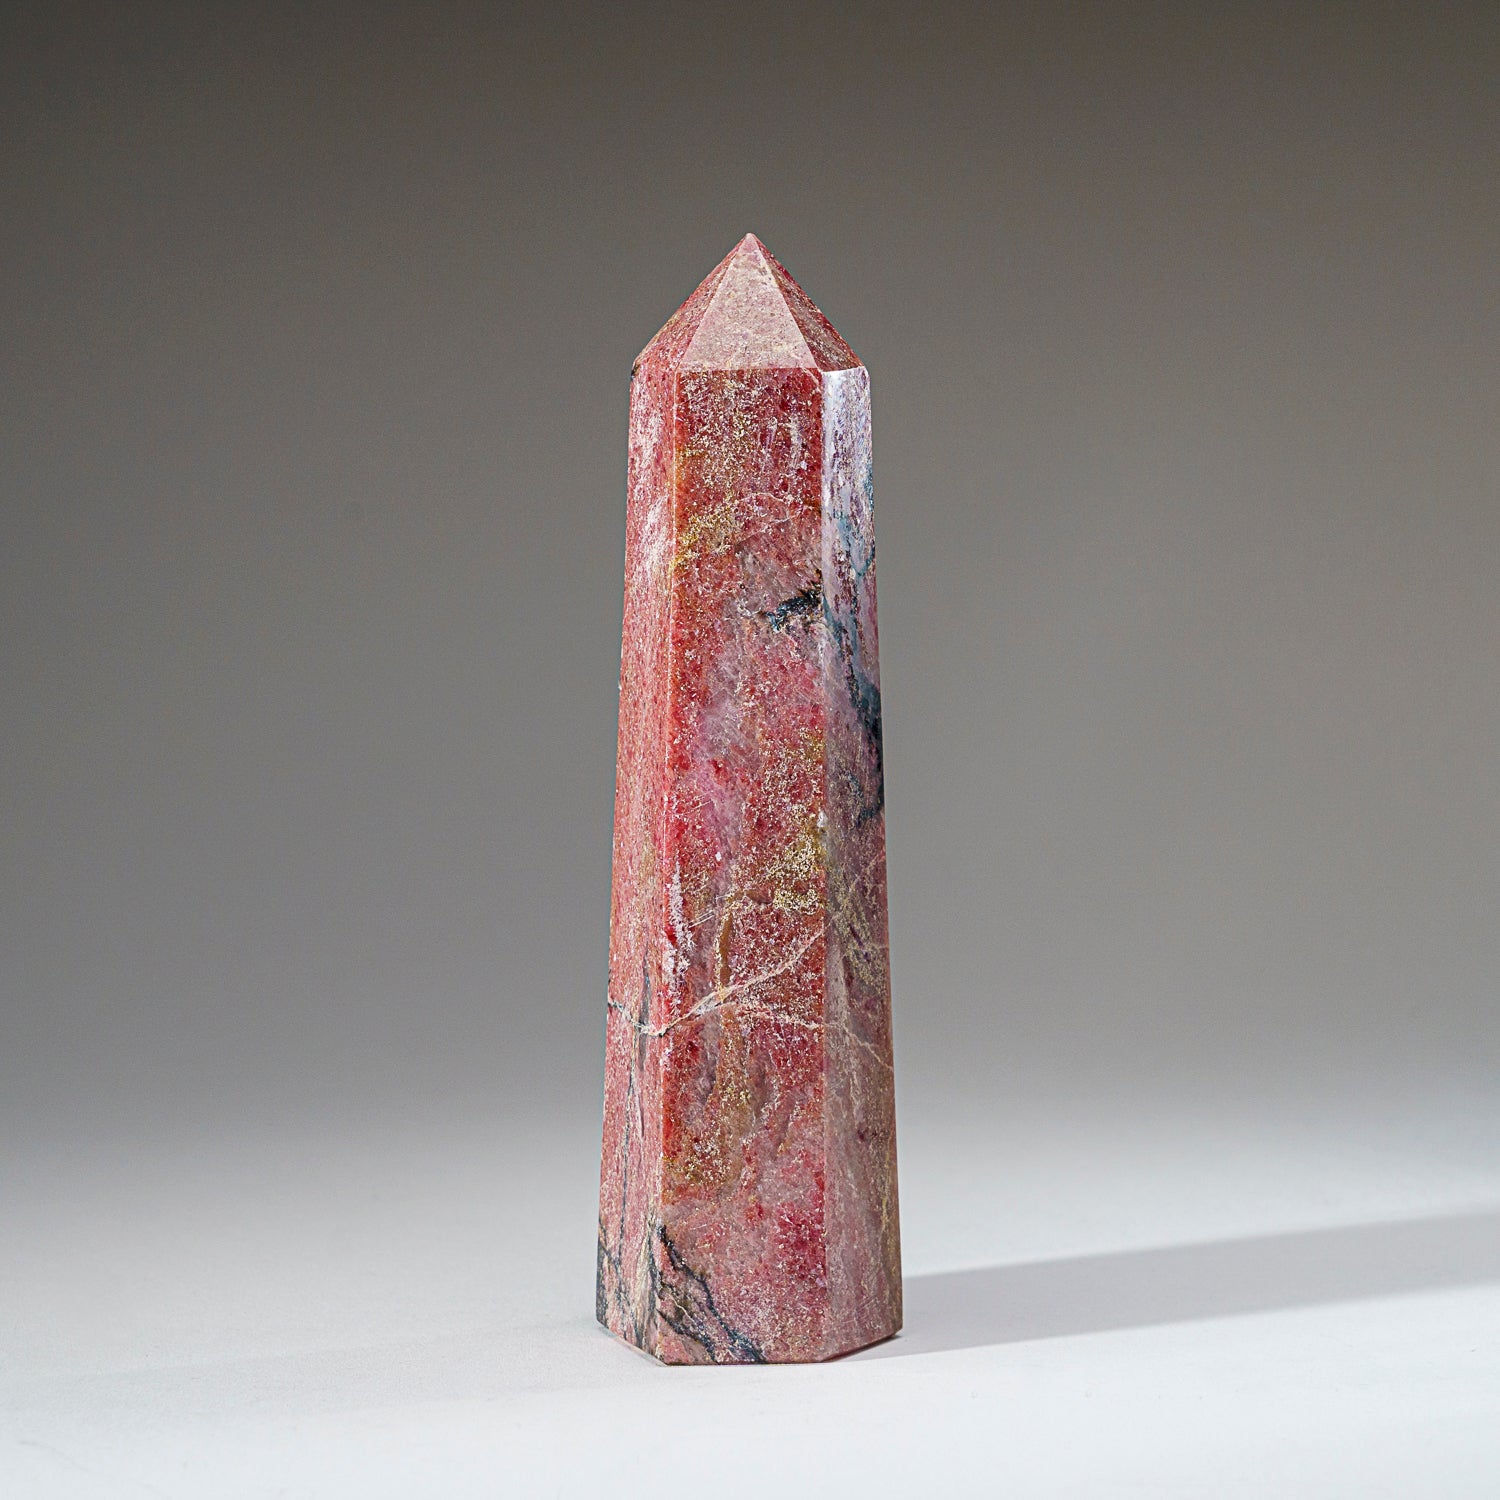 Genuine Polished Imperial Rhodonite Point (2.1 lbs)